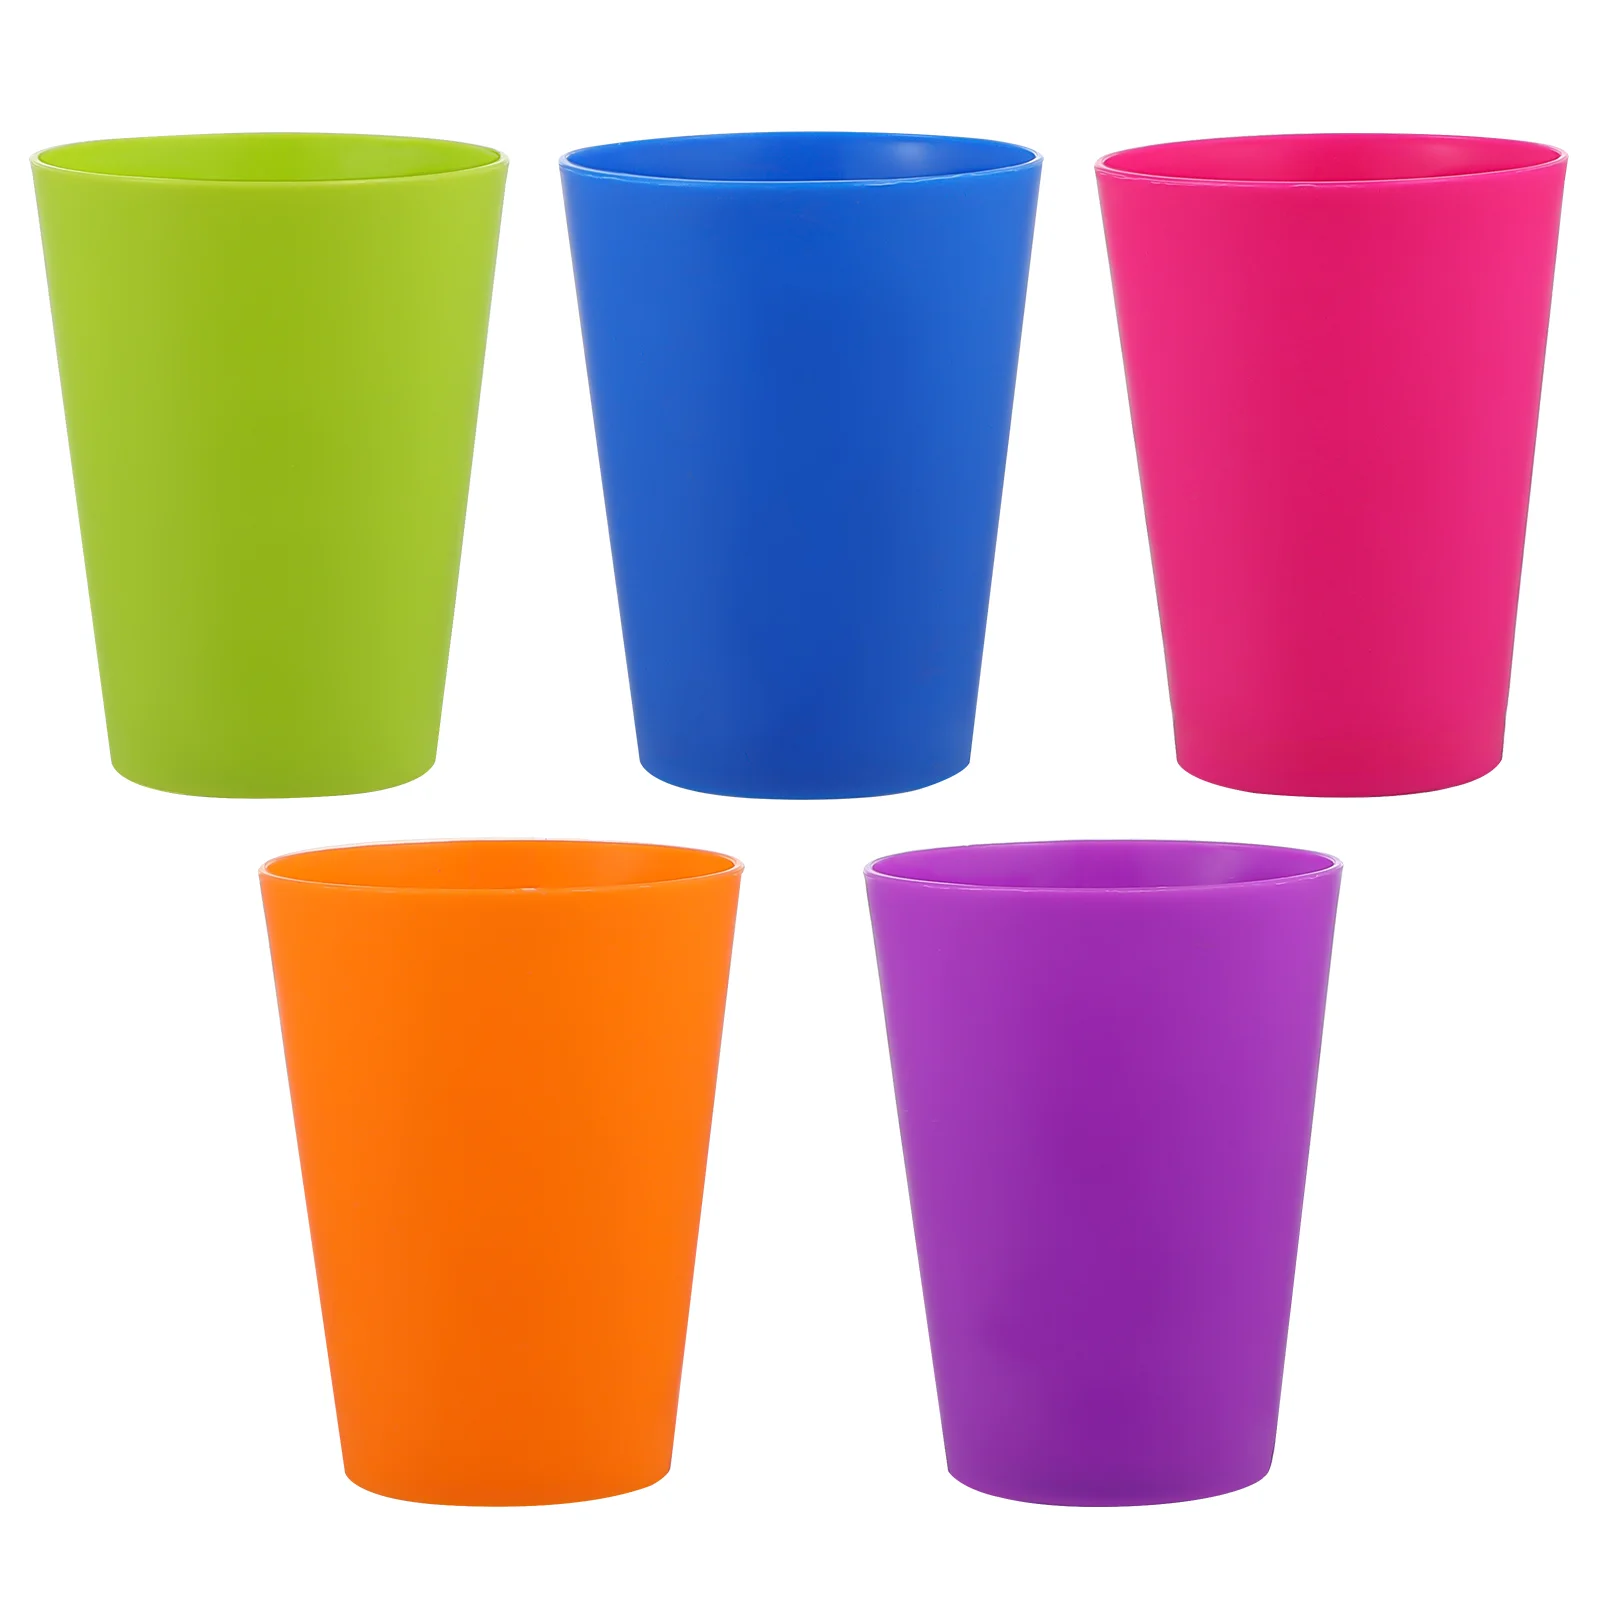 

TOYMYTOY 15pcs Colored Plastic Cups Reusable Drinking Tumblers Break-resistant Beer Beverage Holding Cups